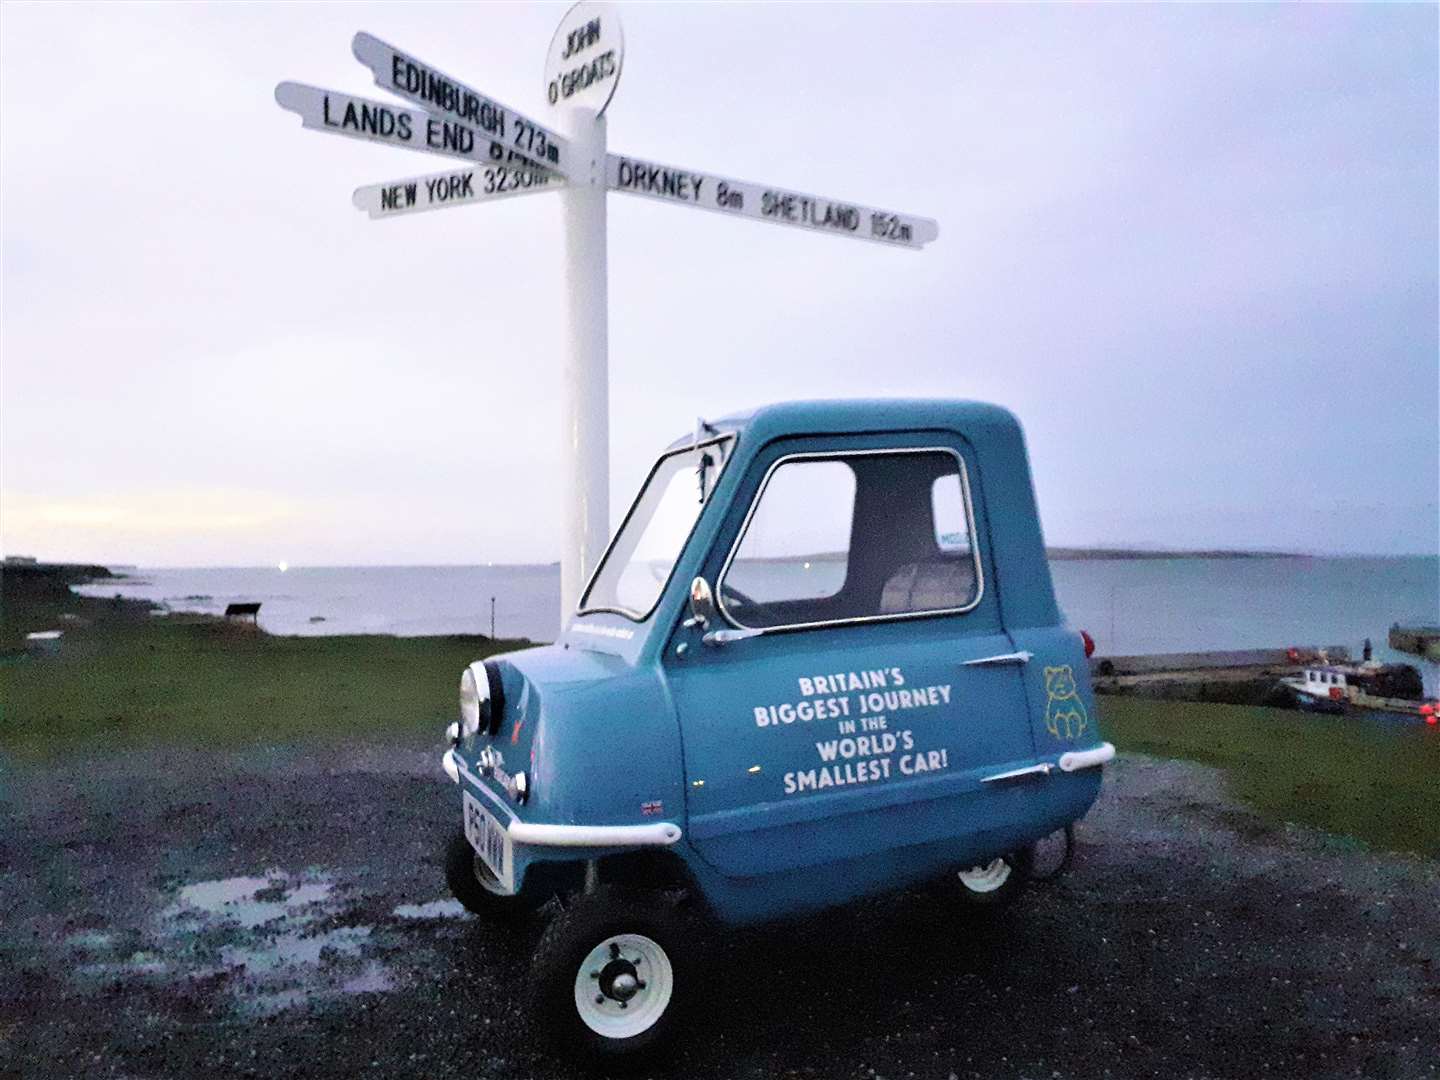 Alex will set off from John O'Groats at around 9am on Saturday November 13.